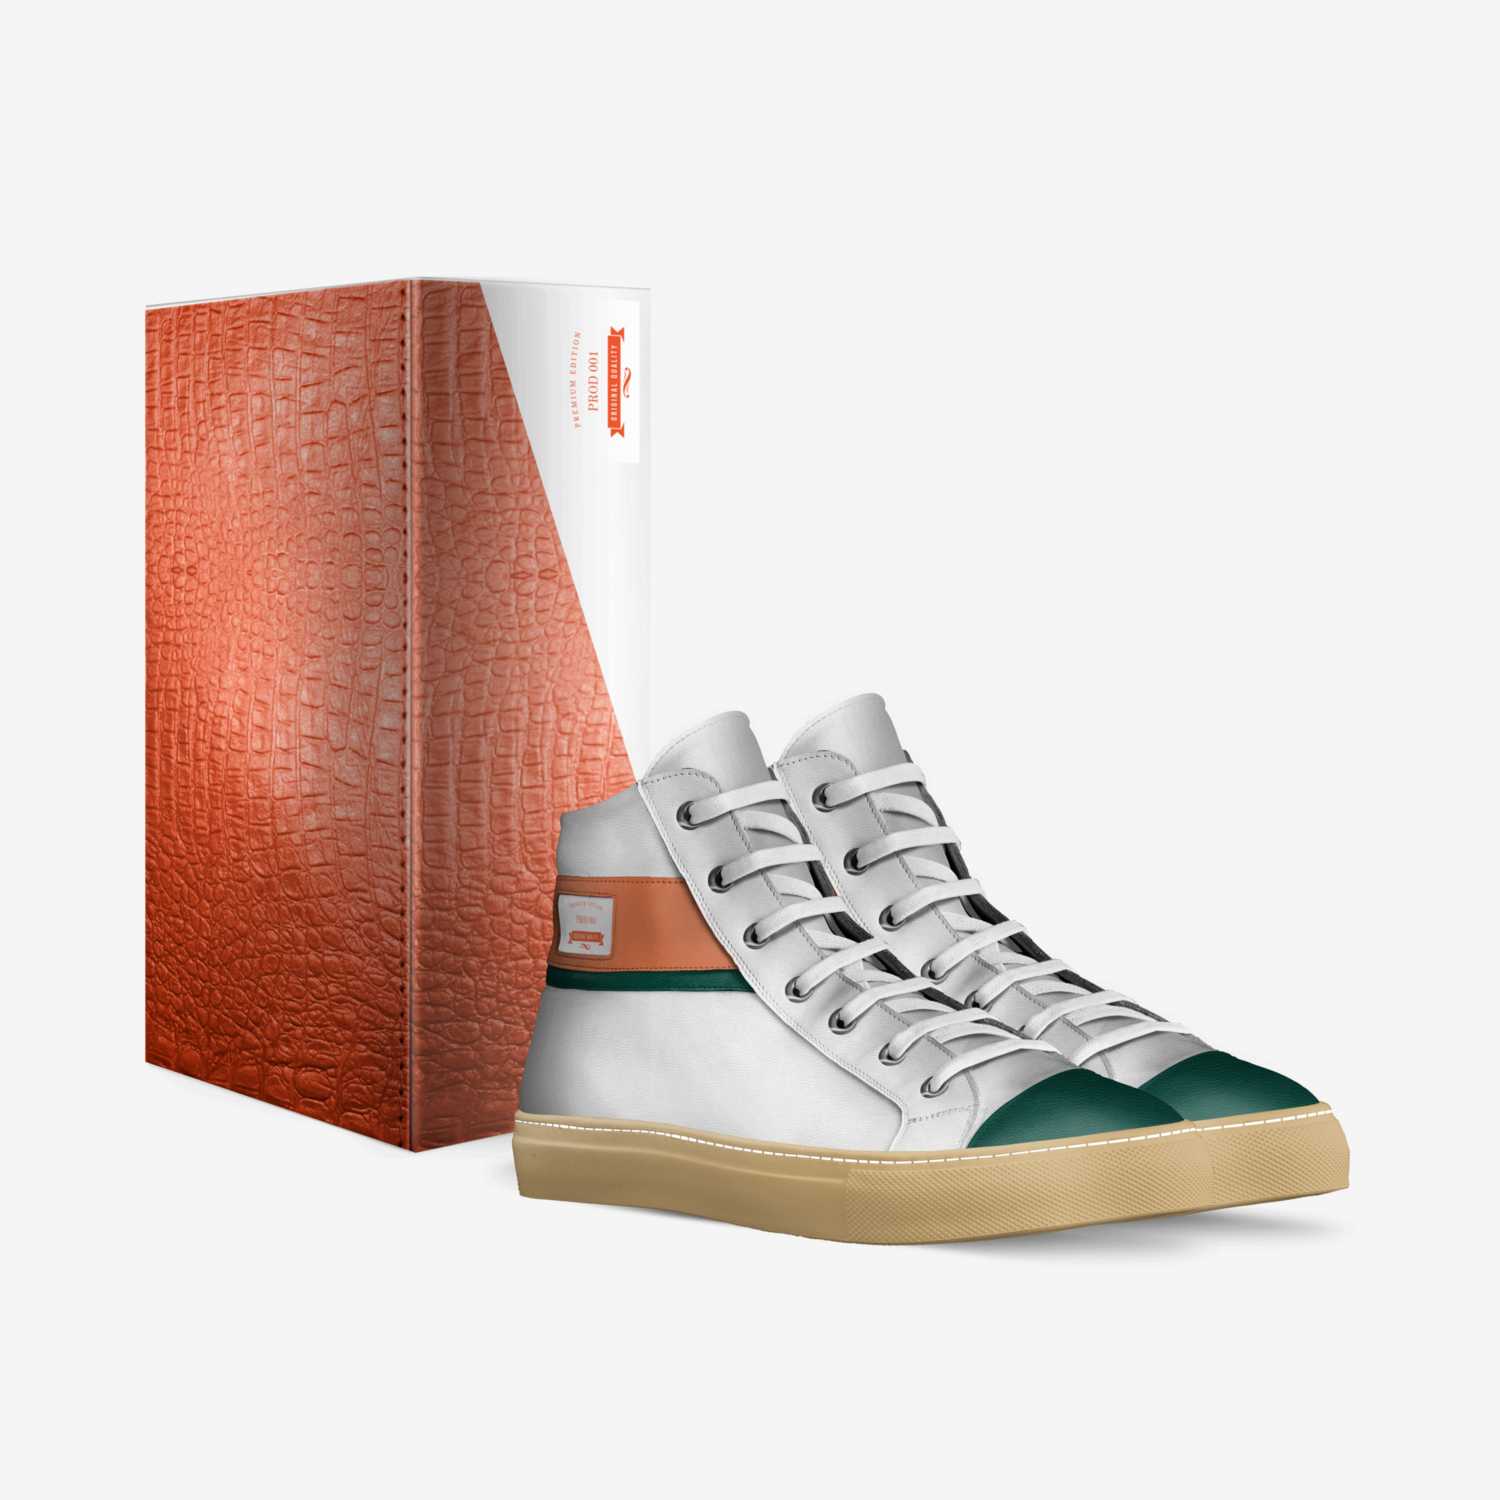 PROD 001 custom made in Italy shoes by Dashiell Lynch | Box view